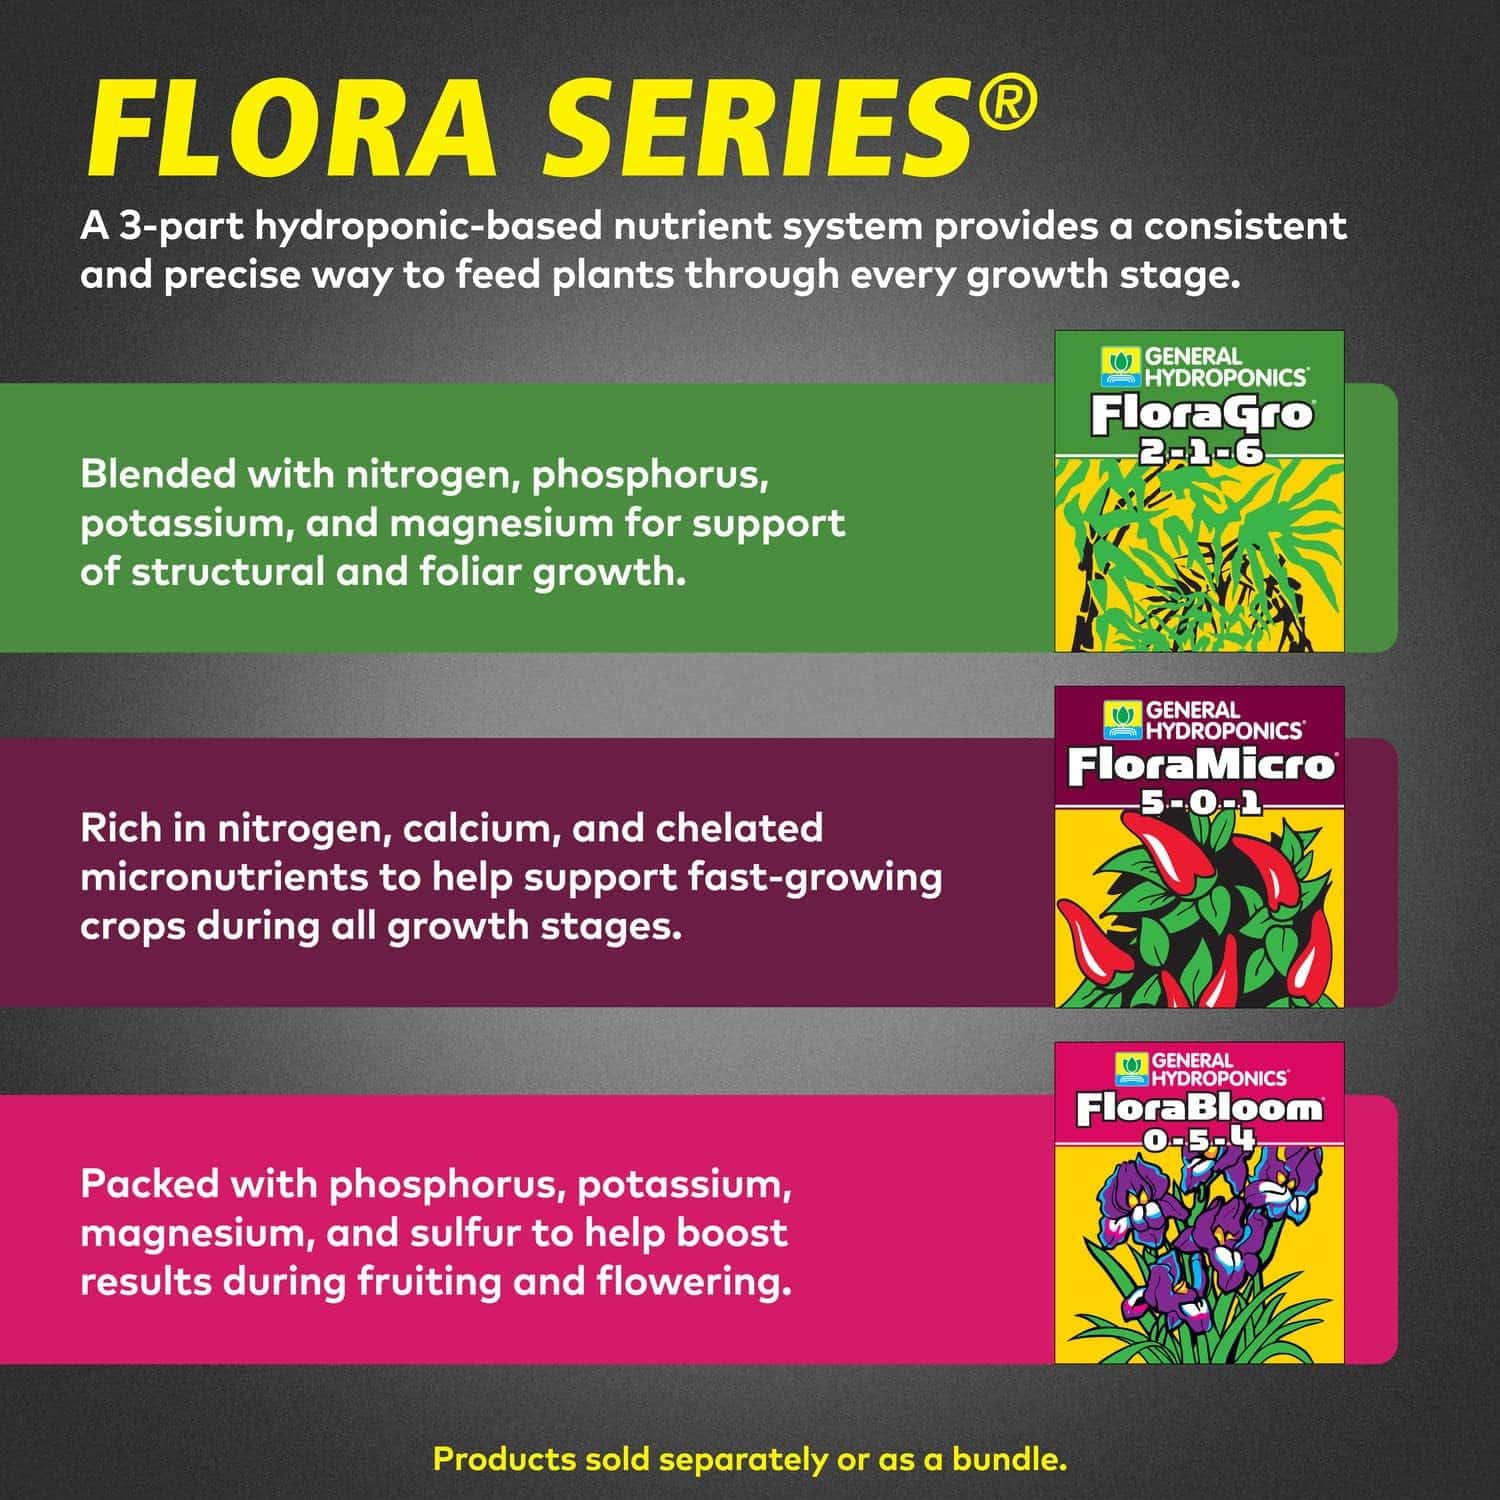 General Hydroponics FloraSeries Hydroponic Nutrient Fertilizer System Trial Pack with FloraMicro, FloraBloom and FloraGro, 1 qt.